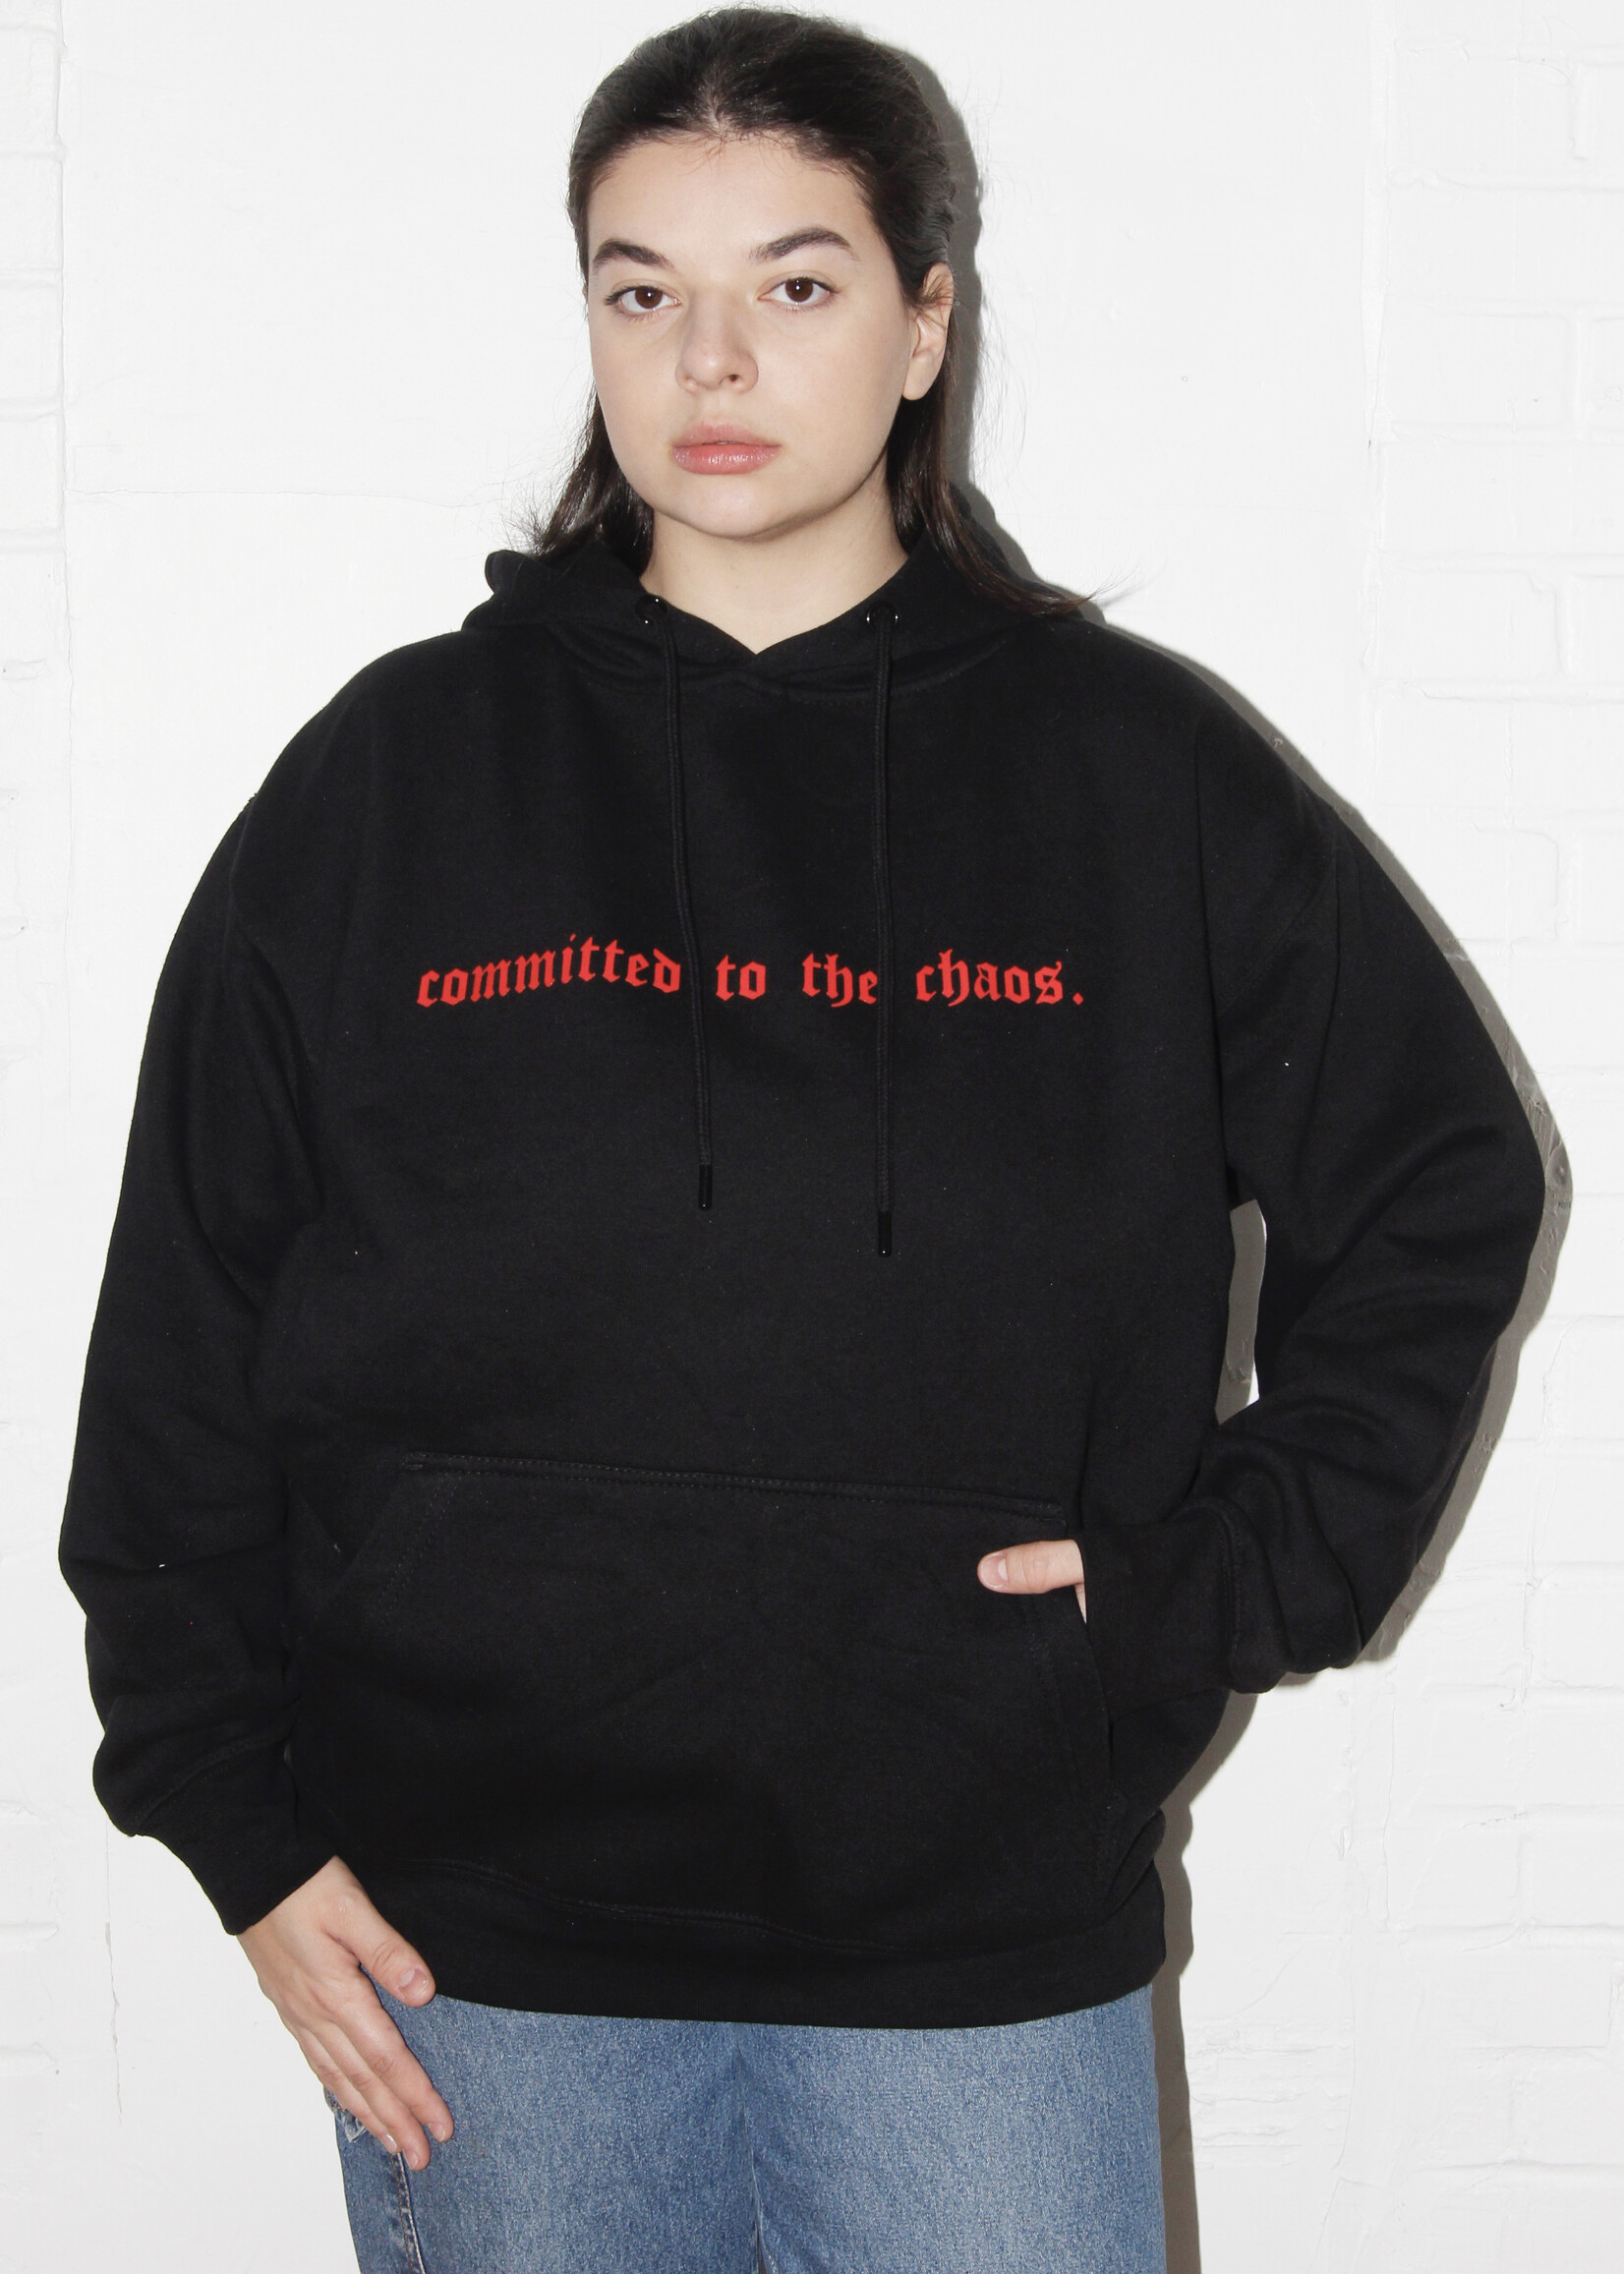 Sensitive Ass Fish Sensitive Ass Fish "Committed to the Chaos" Hoodie